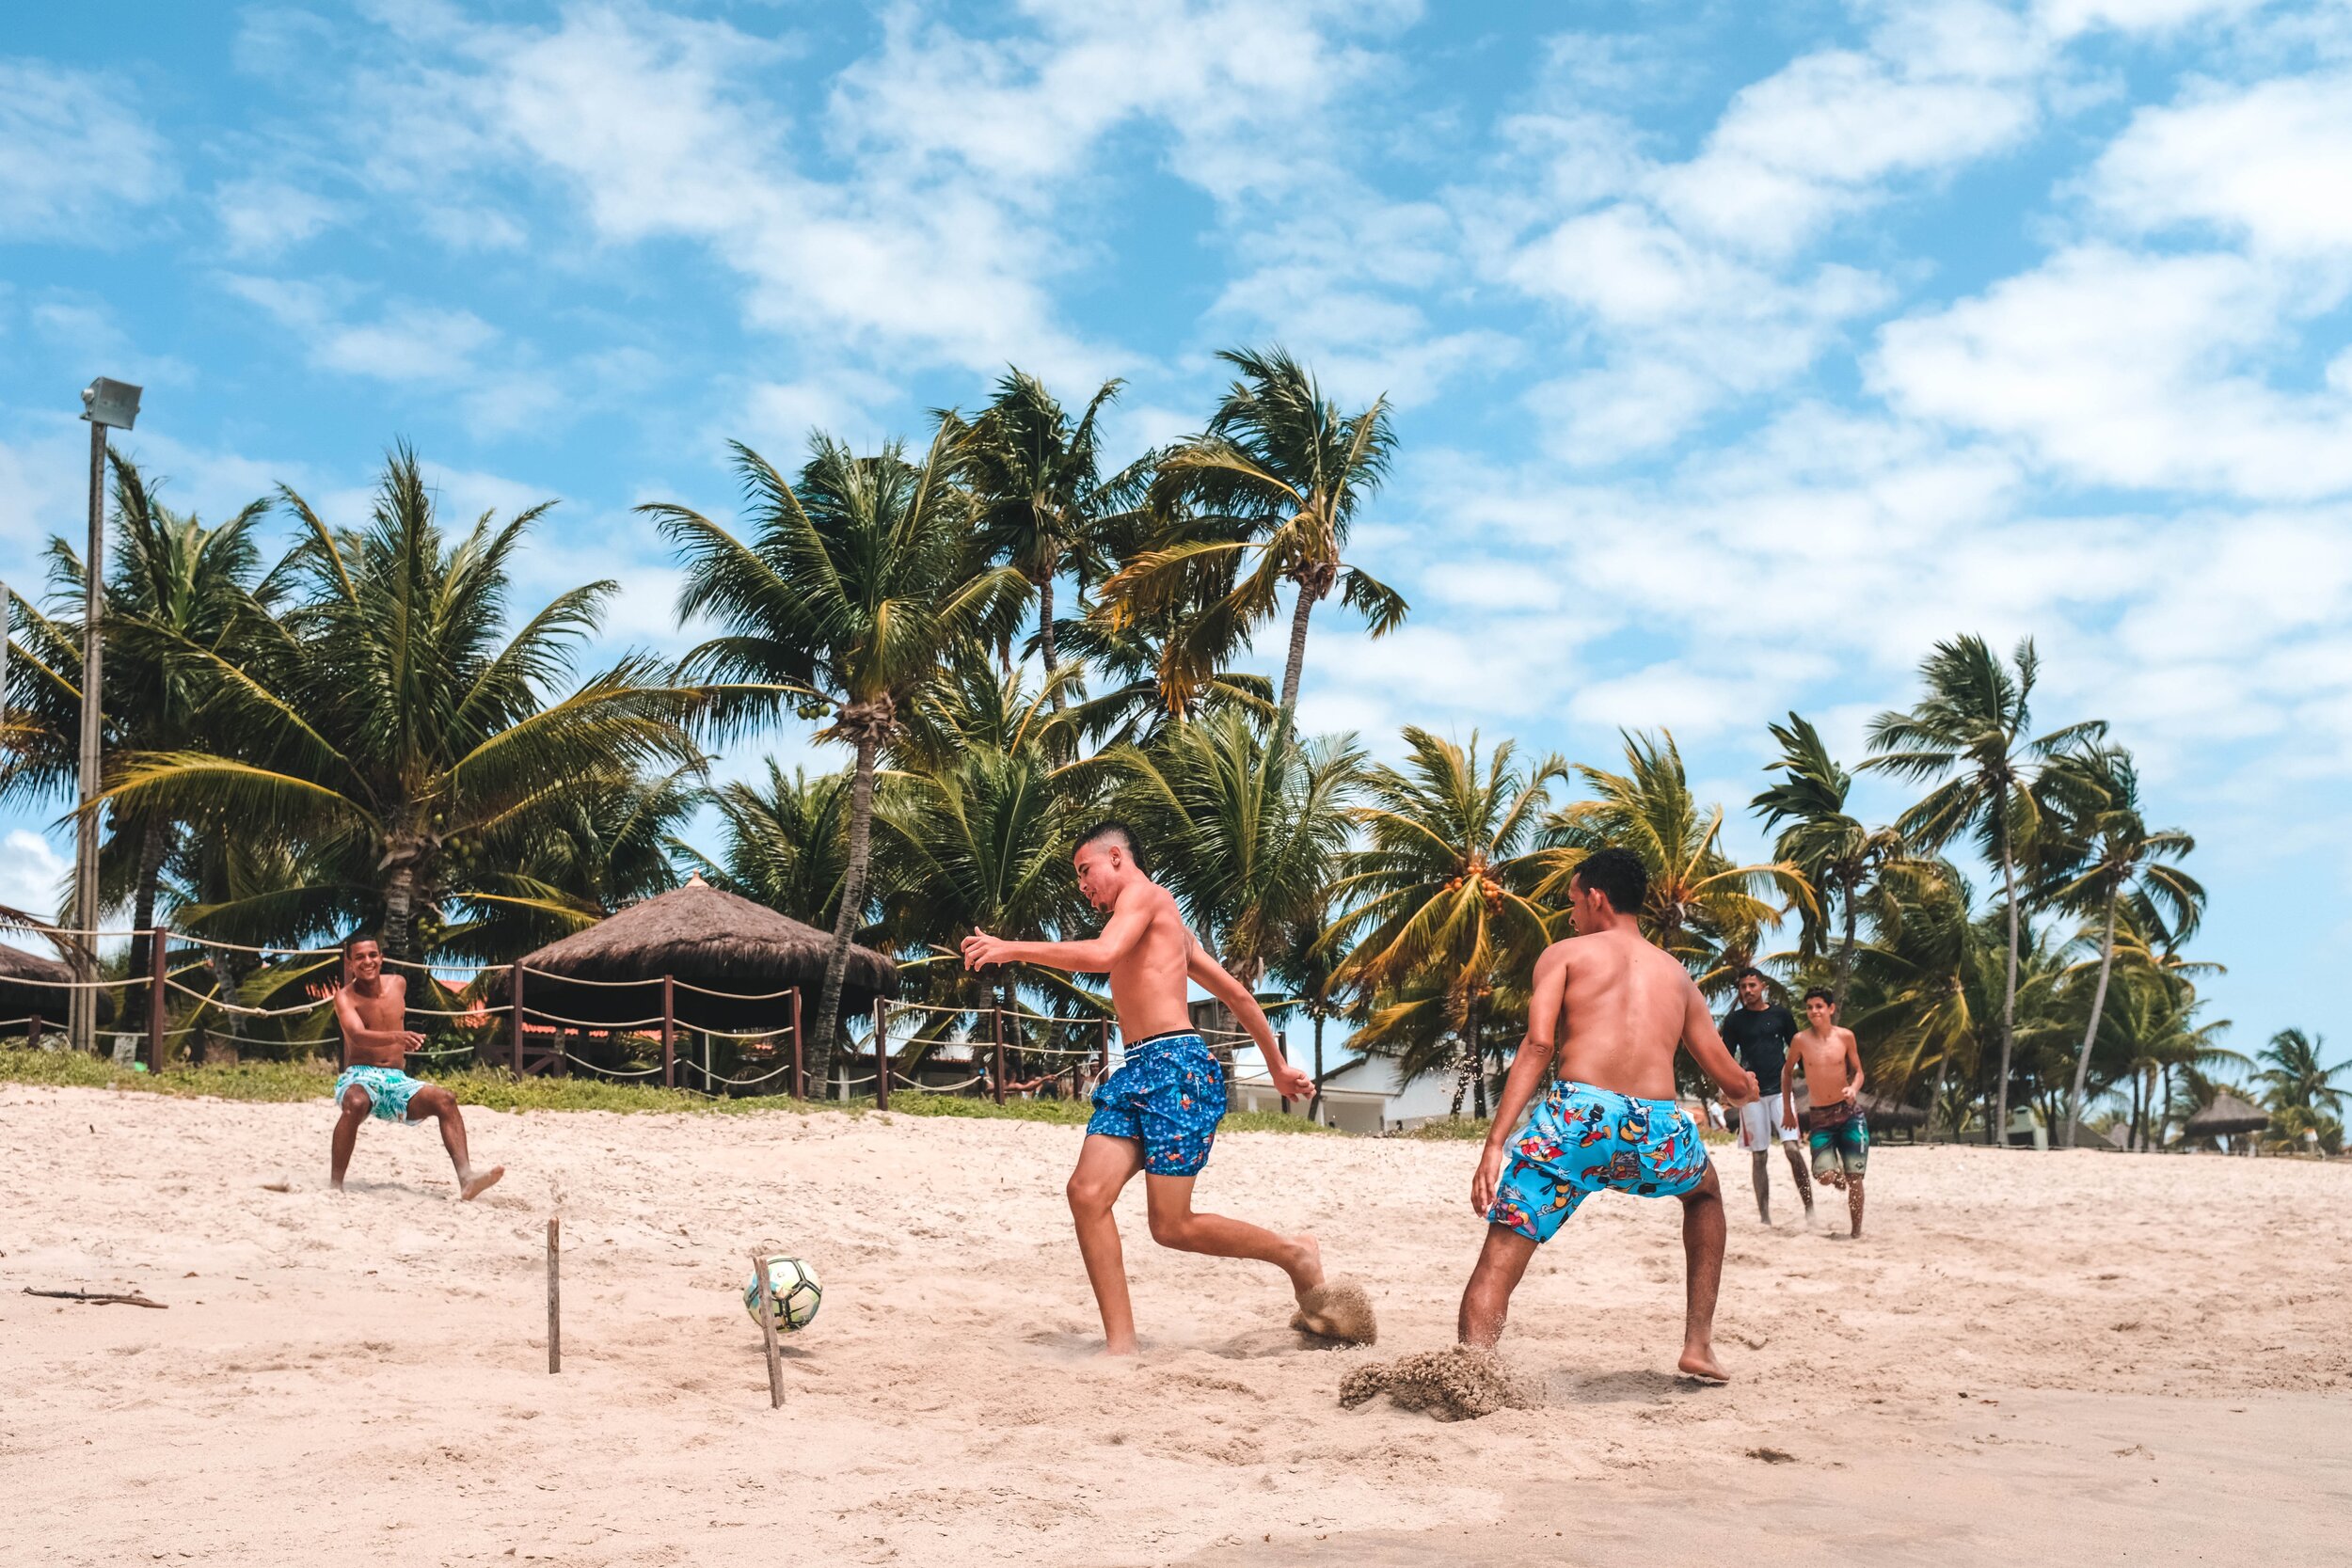 Lulu plays soccer with the locals on the beach in Mozambique on 10KDollarDay.com